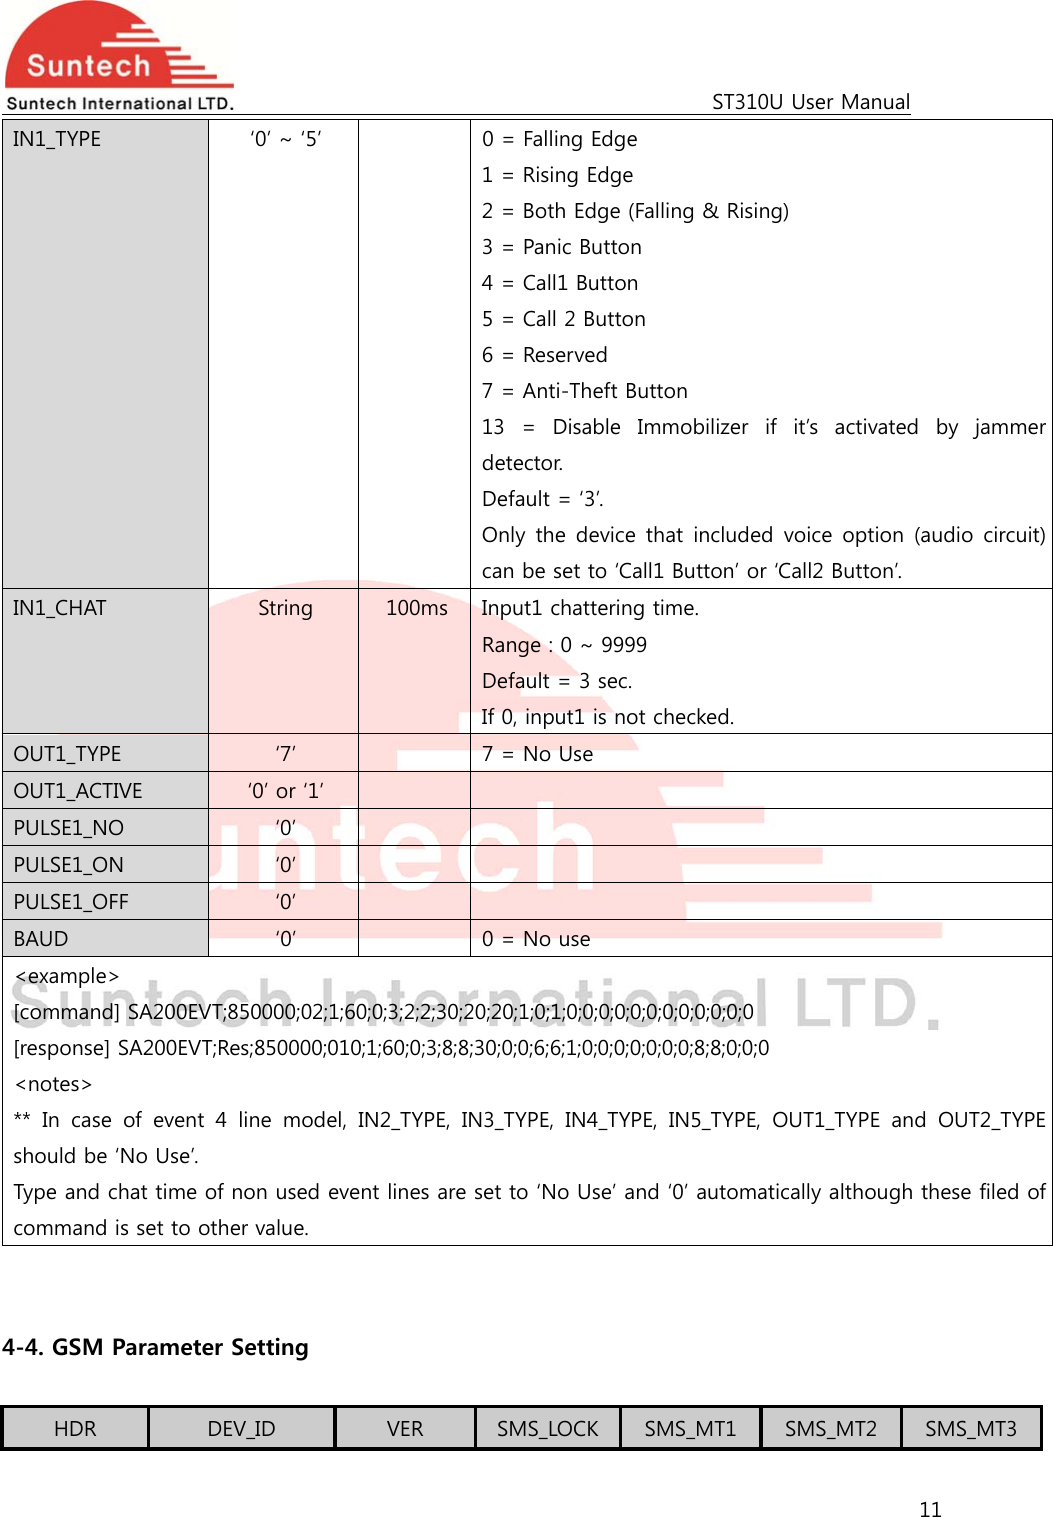                                                                                             ST310U User Manual 11  IN1_TYPE  ‘0’ ~ ‘5’    0 = Falling Edge 1 = Rising Edge 2 = Both Edge (Falling &amp; Rising) 3 = Panic Button 4 = Call1 Button 5 = Call 2 Button 6 = Reserved 7 = Anti-Theft Button 13  =  Disable  Immobilizer  if  it’s  activated  by  jammer detector. Default = ‘3’. Only  the  device  that  included  voice  option  (audio circuit) can be set to ‘Call1 Button’ or ‘Call2 Button’. IN1_CHAT  String  100ms  Input1 chattering time.   Range : 0 ~ 9999 Default = 3 sec. If 0, input1 is not checked. OUT1_TYPE  ‘7’    7 = No Use OUT1_ACTIVE  ‘0’ or ‘1’     PULSE1_NO  ‘0’     PULSE1_ON  ‘0’     PULSE1_OFF  ‘0’     BAUD  ‘0’    0 = No use &lt;example&gt; [command] SA200EVT;850000;02;1;60;0;3;2;2;30;20;20;1;0;1;0;0;0;0;0;0;0;0;0;0;0;0 [response] SA200EVT;Res;850000;010;1;60;0;3;8;8;30;0;0;6;6;1;0;0;0;0;0;0;0;8;8;0;0;0 &lt;notes&gt; ** In case of event 4 line model, IN2_TYPE, IN3_TYPE, IN4_TYPE, IN5_TYPE, OUT1_TYPE and OUT2_TYPE should be ‘No Use’. Type and chat time of non used event lines are set to ‘No Use’ and ‘0’ automatically although these filed of command is set to other value.   4-4. GSM Parameter Setting  HDR  DEV_ID  VER  SMS_LOCK  SMS_MT1  SMS_MT2  SMS_MT3 